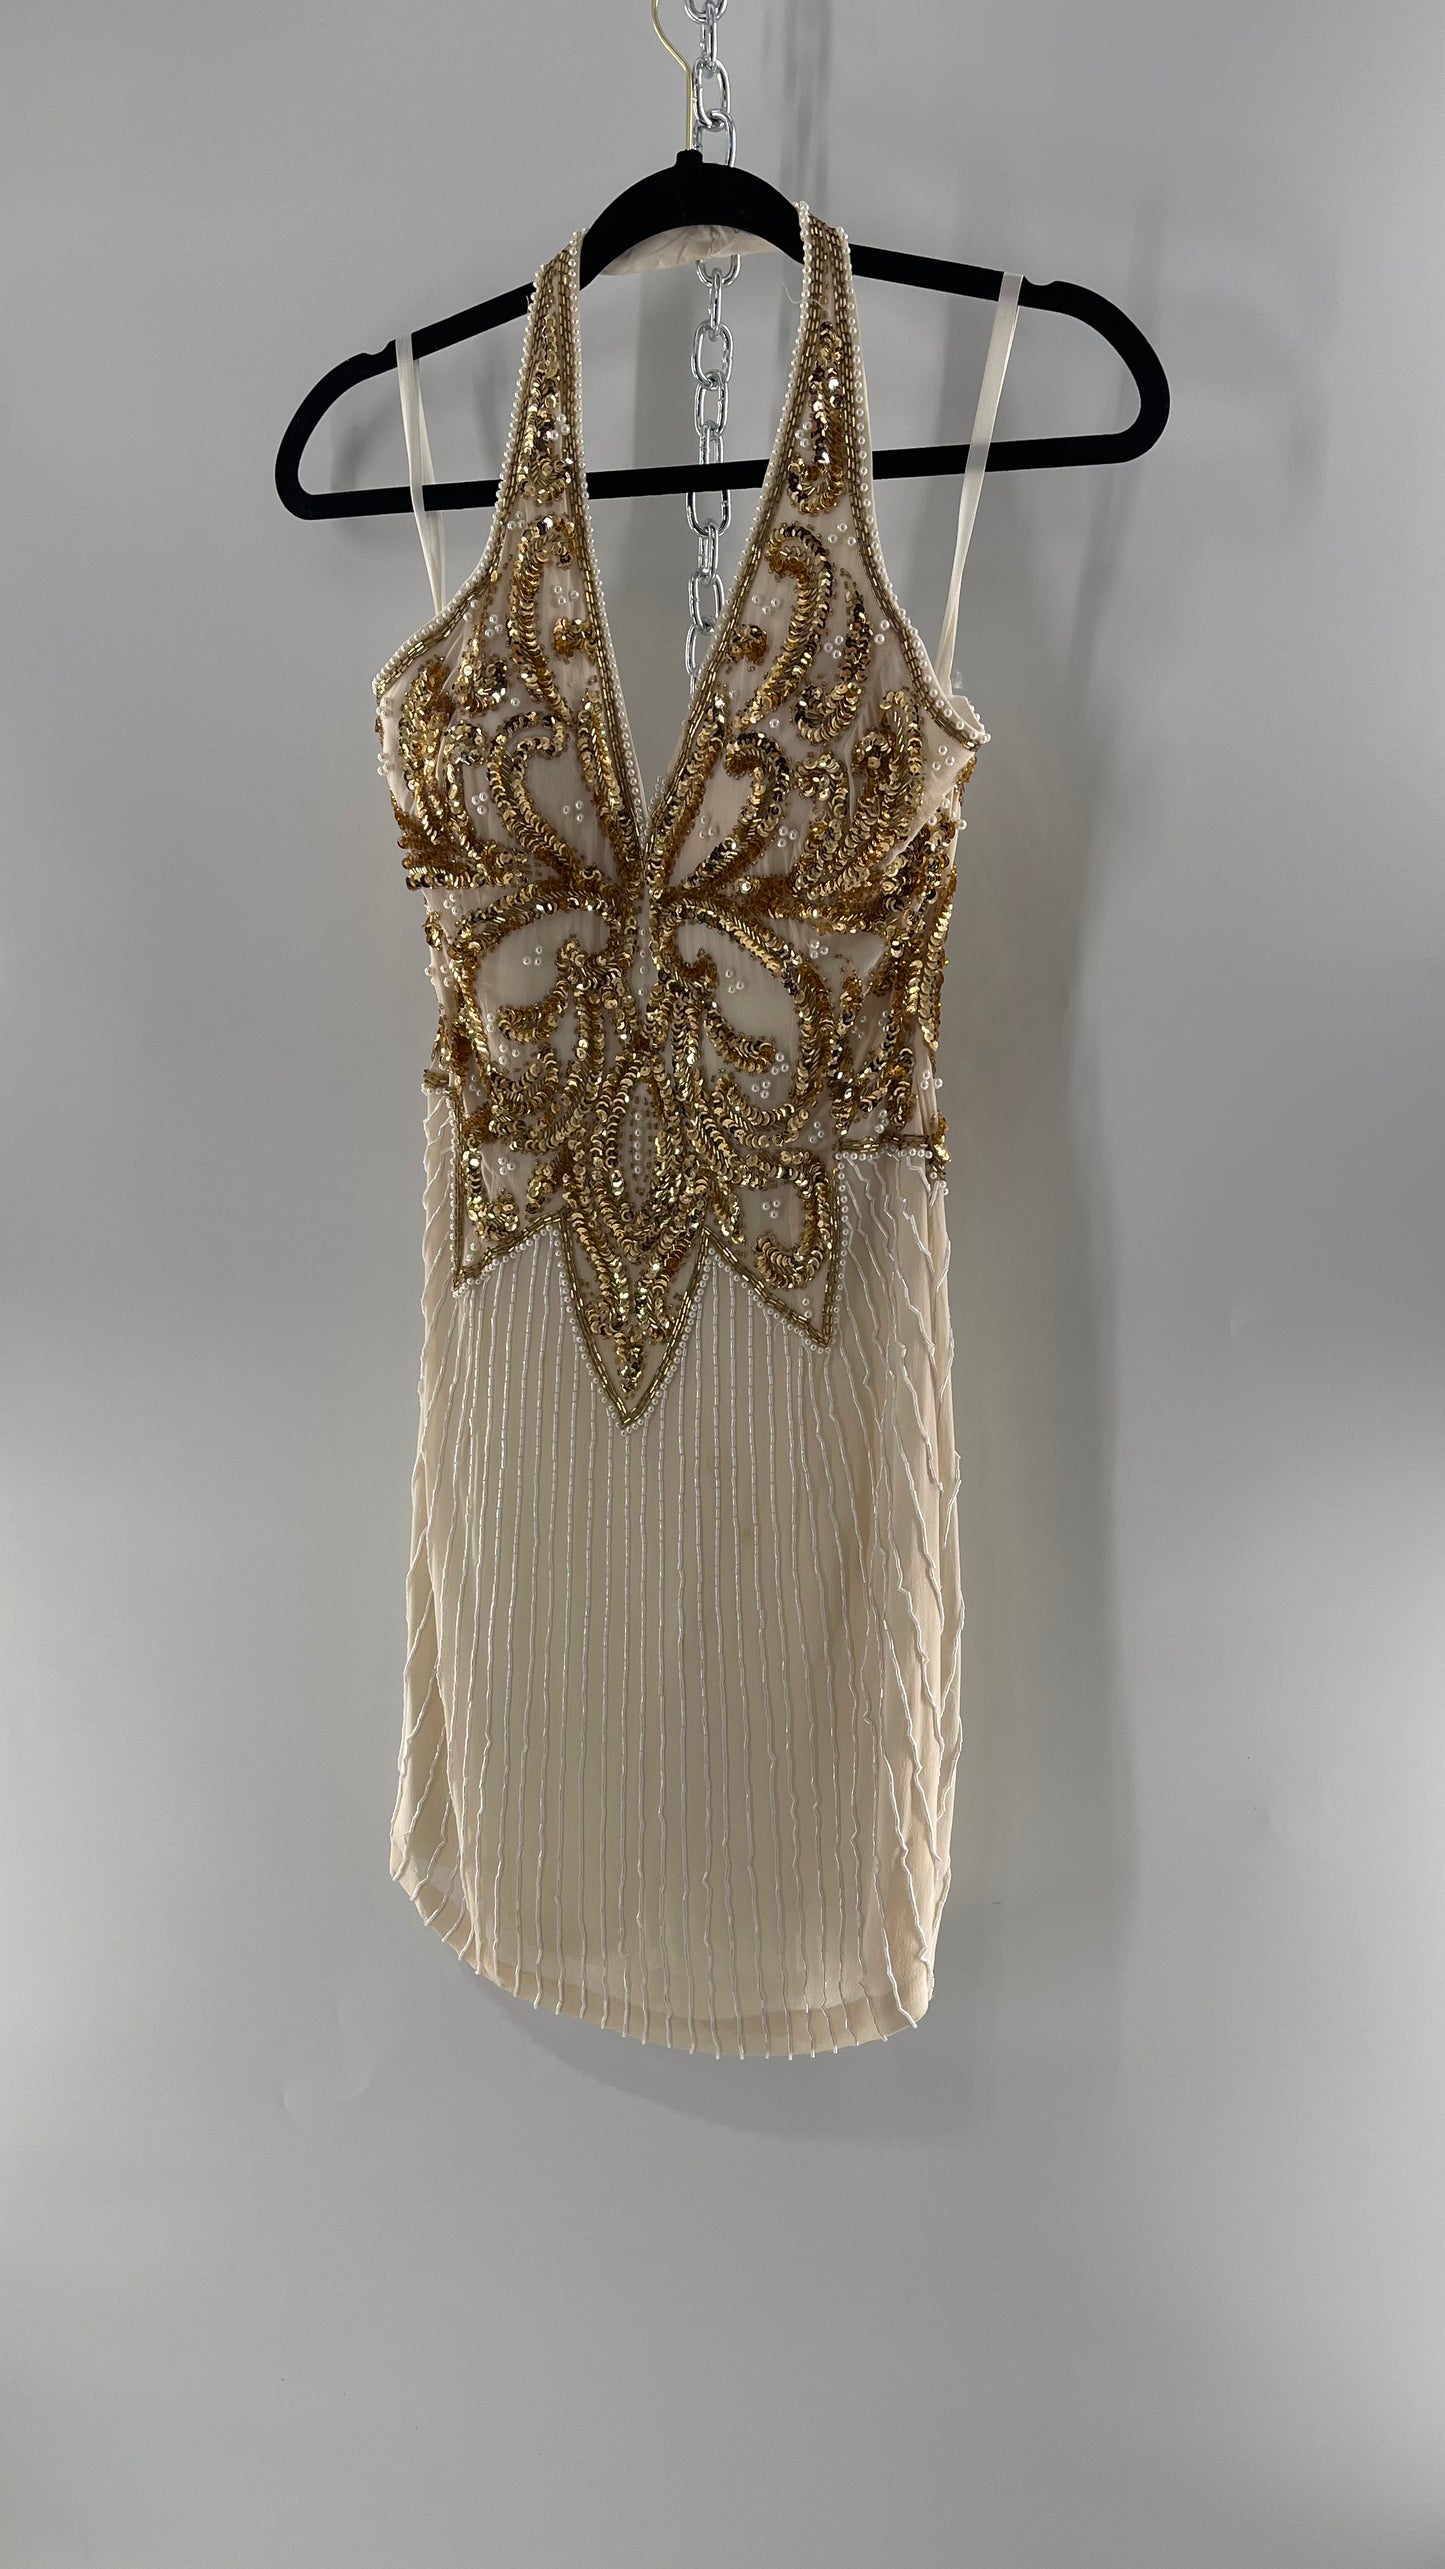 Cache Beaded Old Hollywood Glam White Beaded BodyCon Mini Dress with Halter Neckline and Bedazzled Gold Sequin Bust (4)